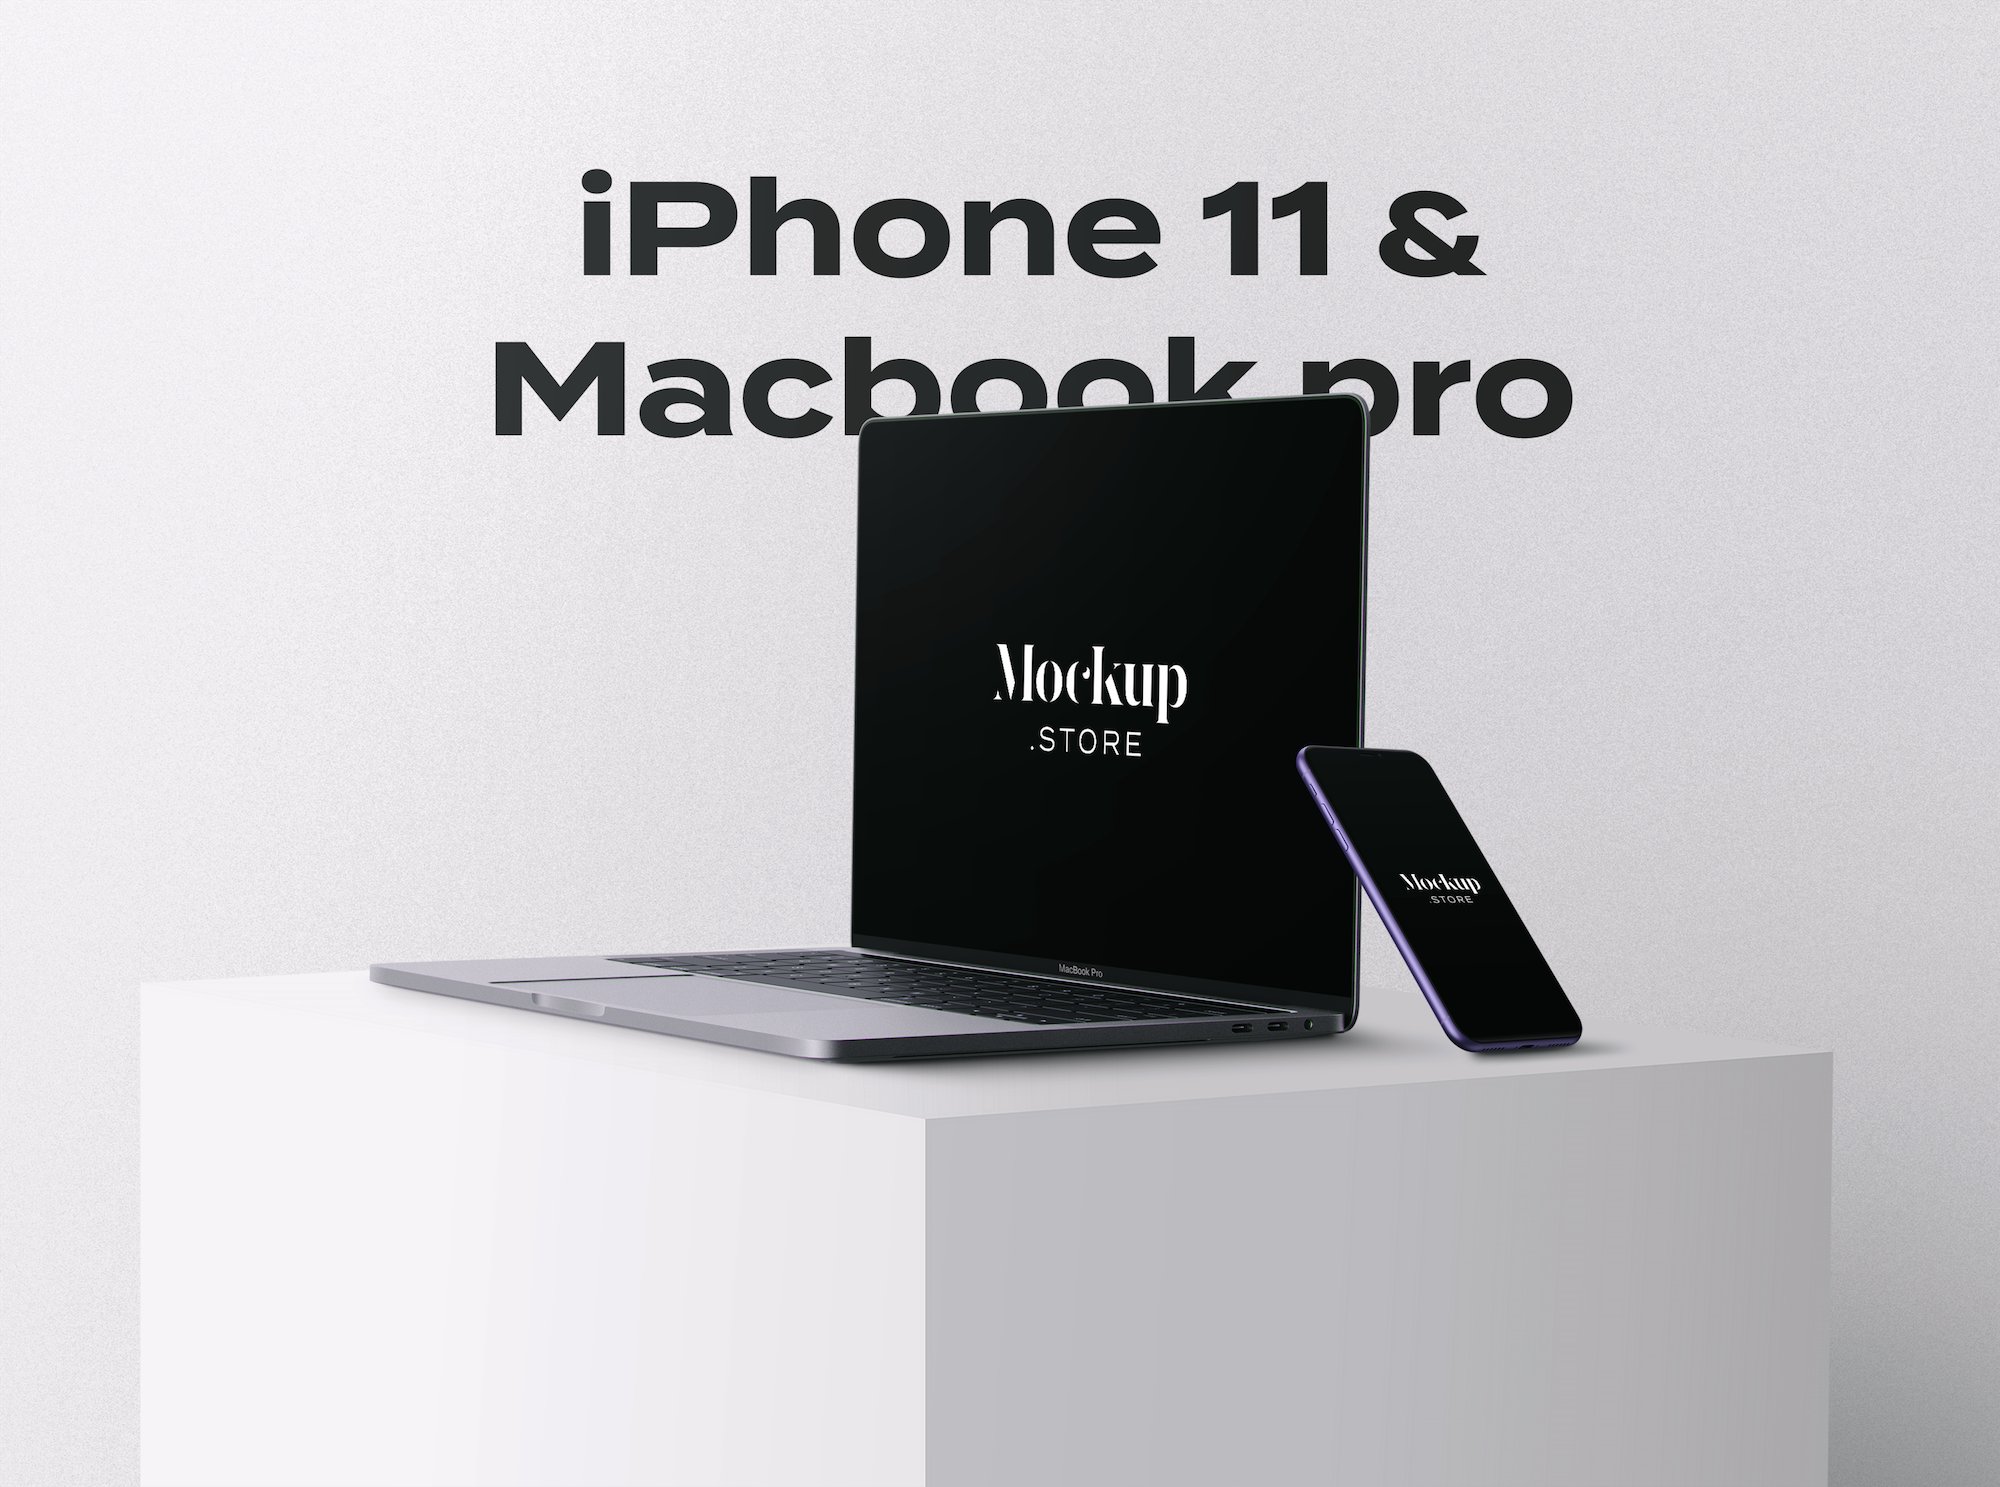 iPhone 11 and Macbook pro Mockups cover image.